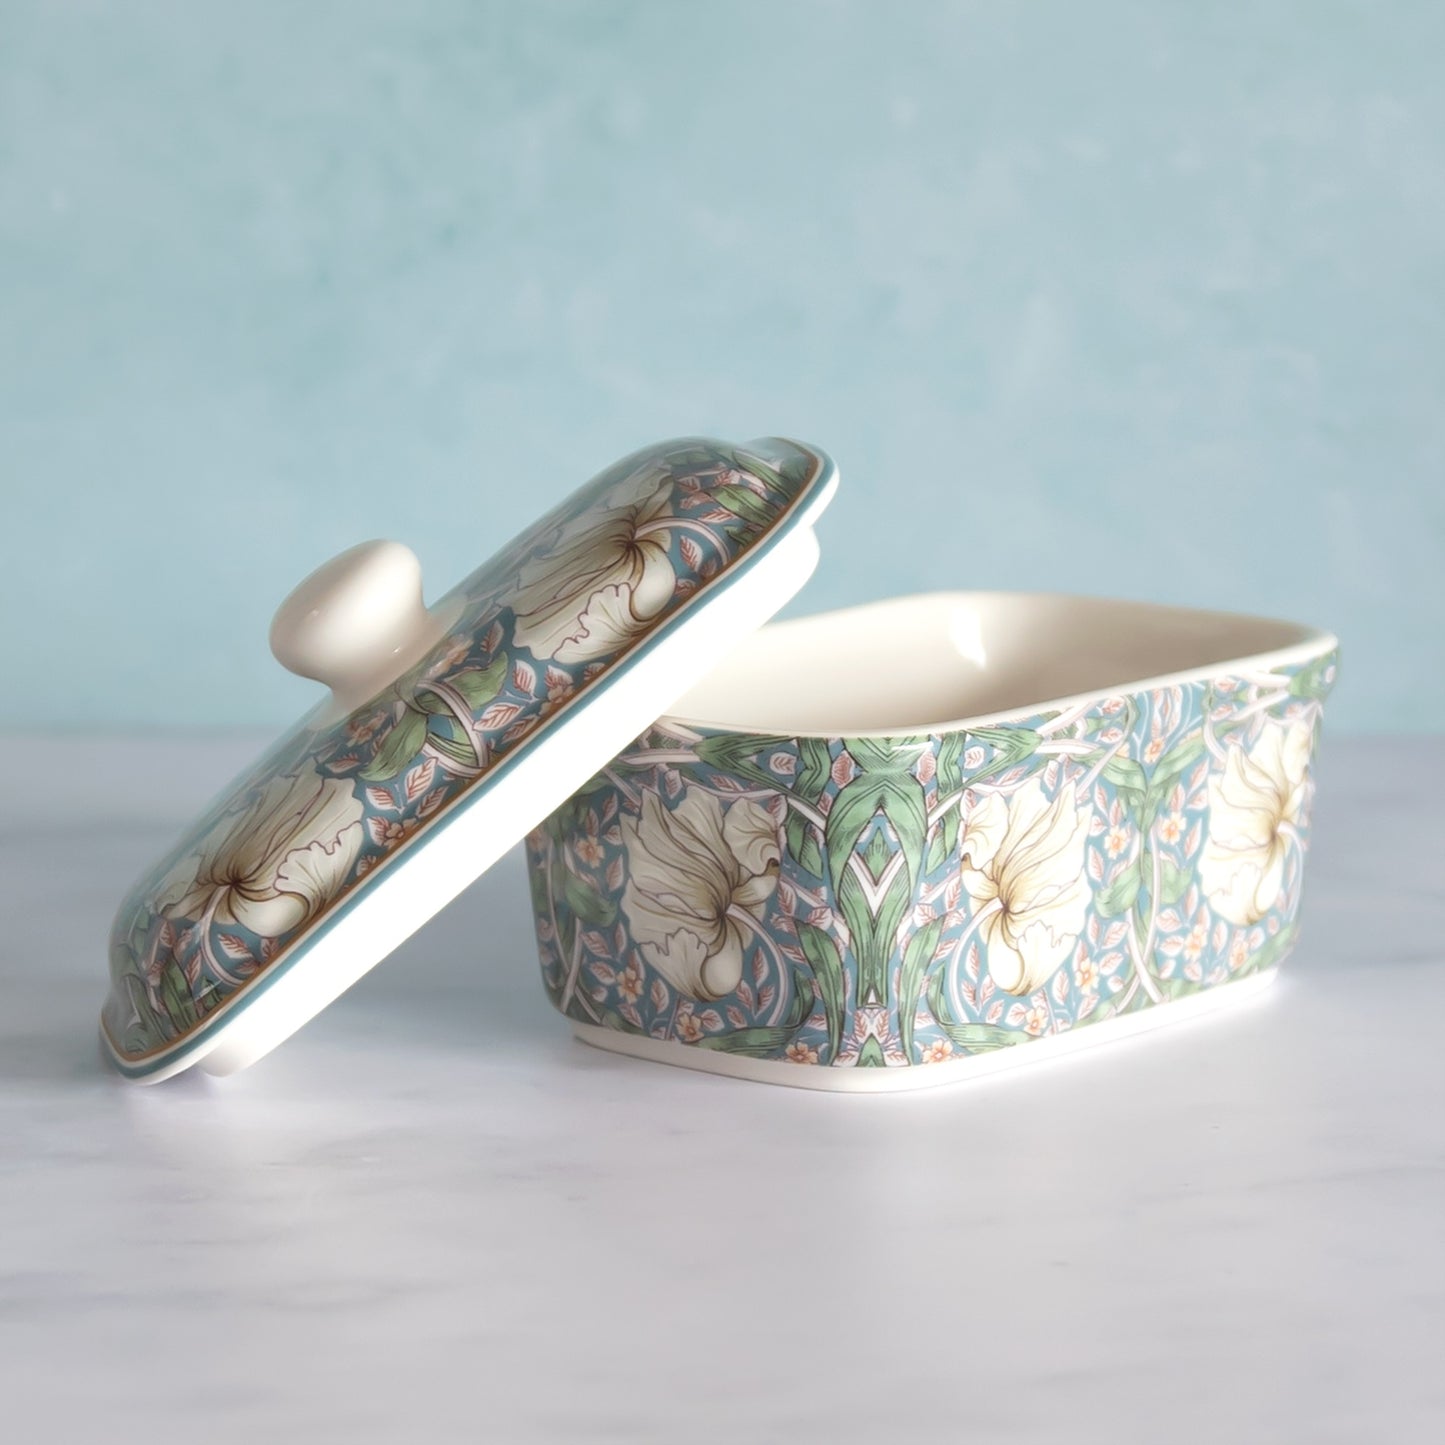 William Morris Pimpernel Butter Dish with Lid